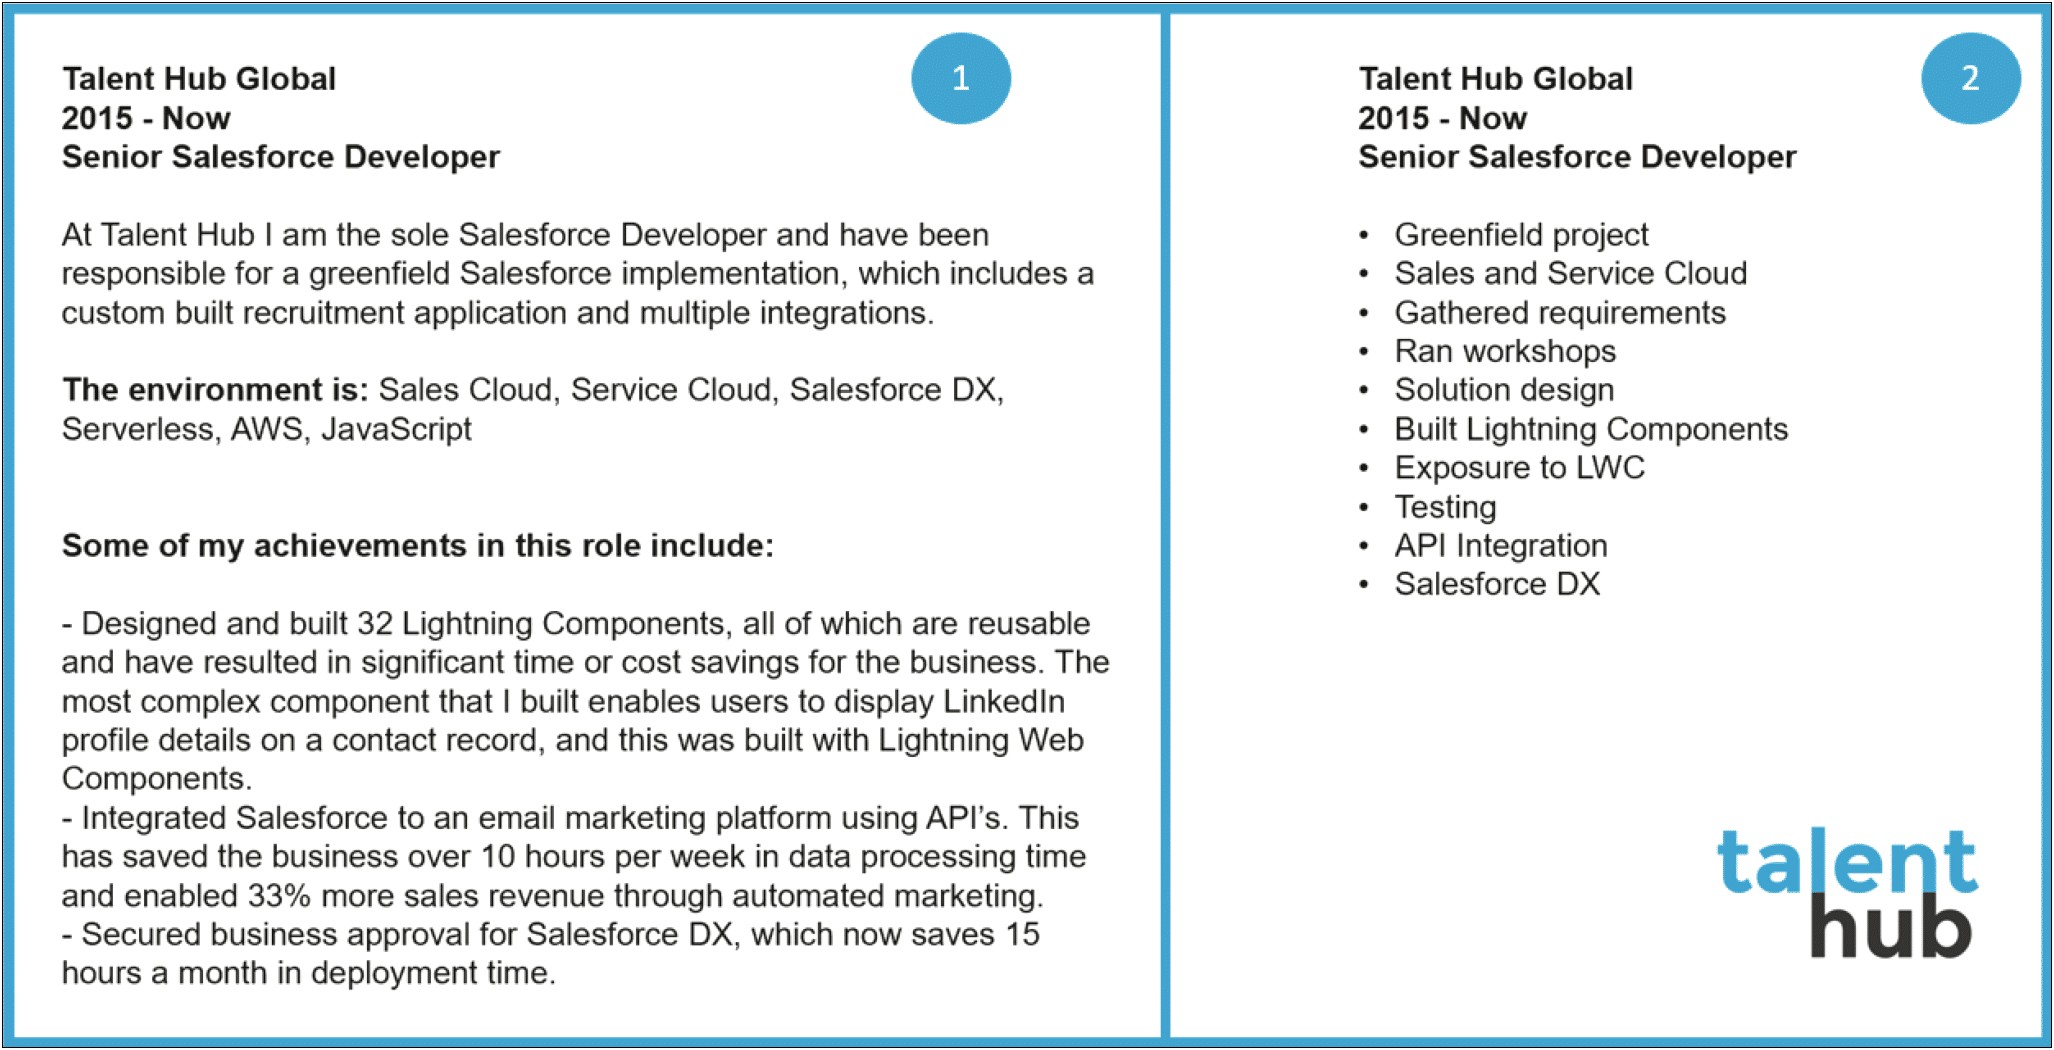 Salesforce Admin Resume With Lightning Experience